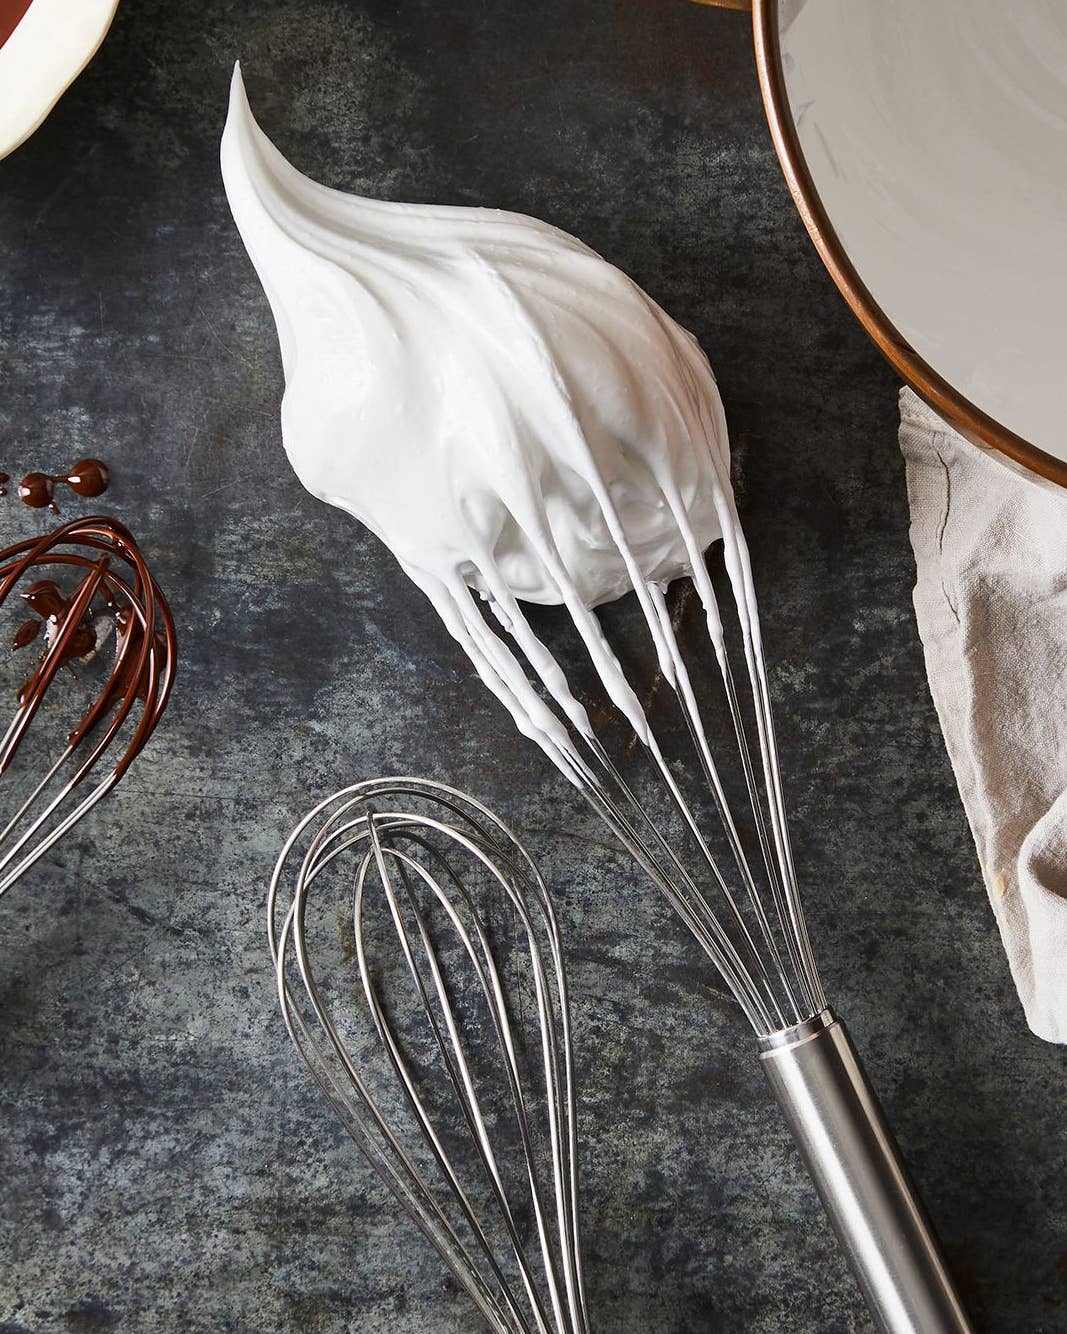 The Best Whisk Isn’t Necessarily Balloon-Style